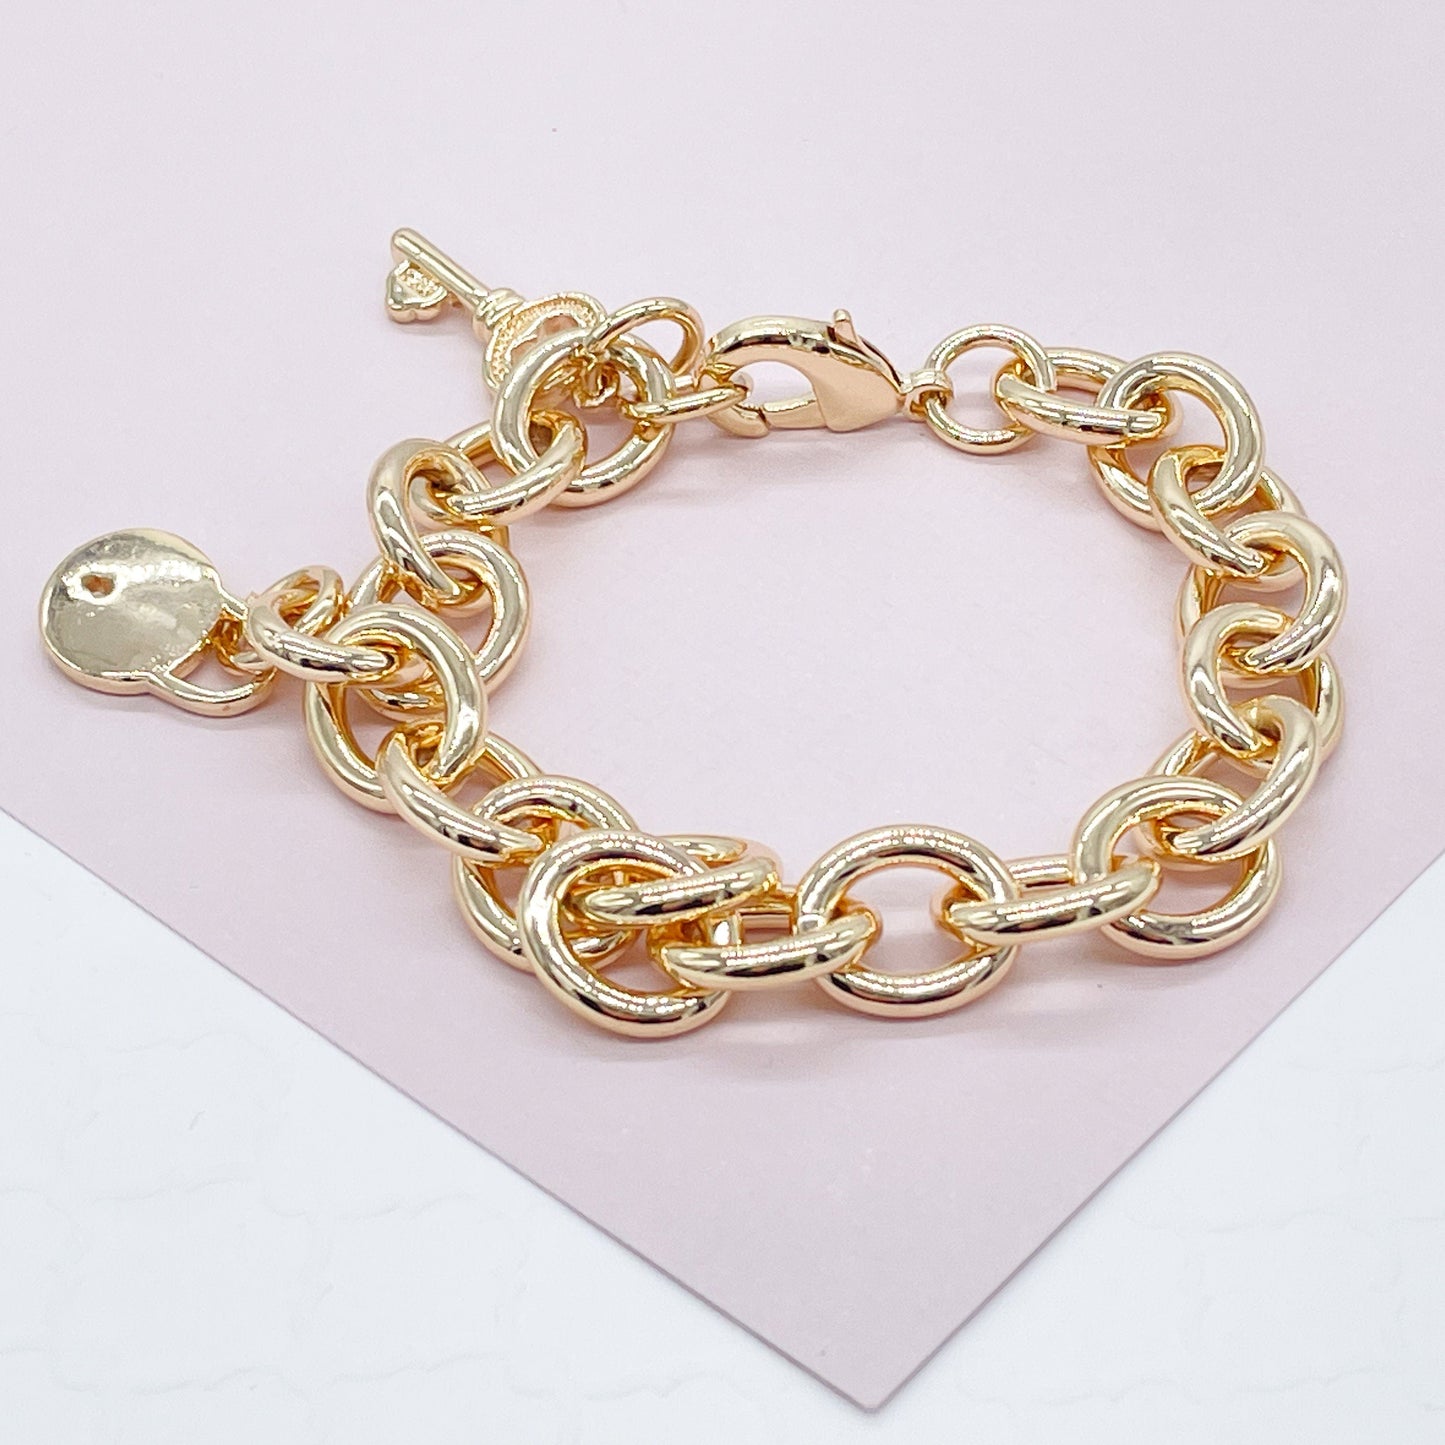 Chunky 18k Gold Layered Lock Heart And Key Bracelet Available in Gold, Rose